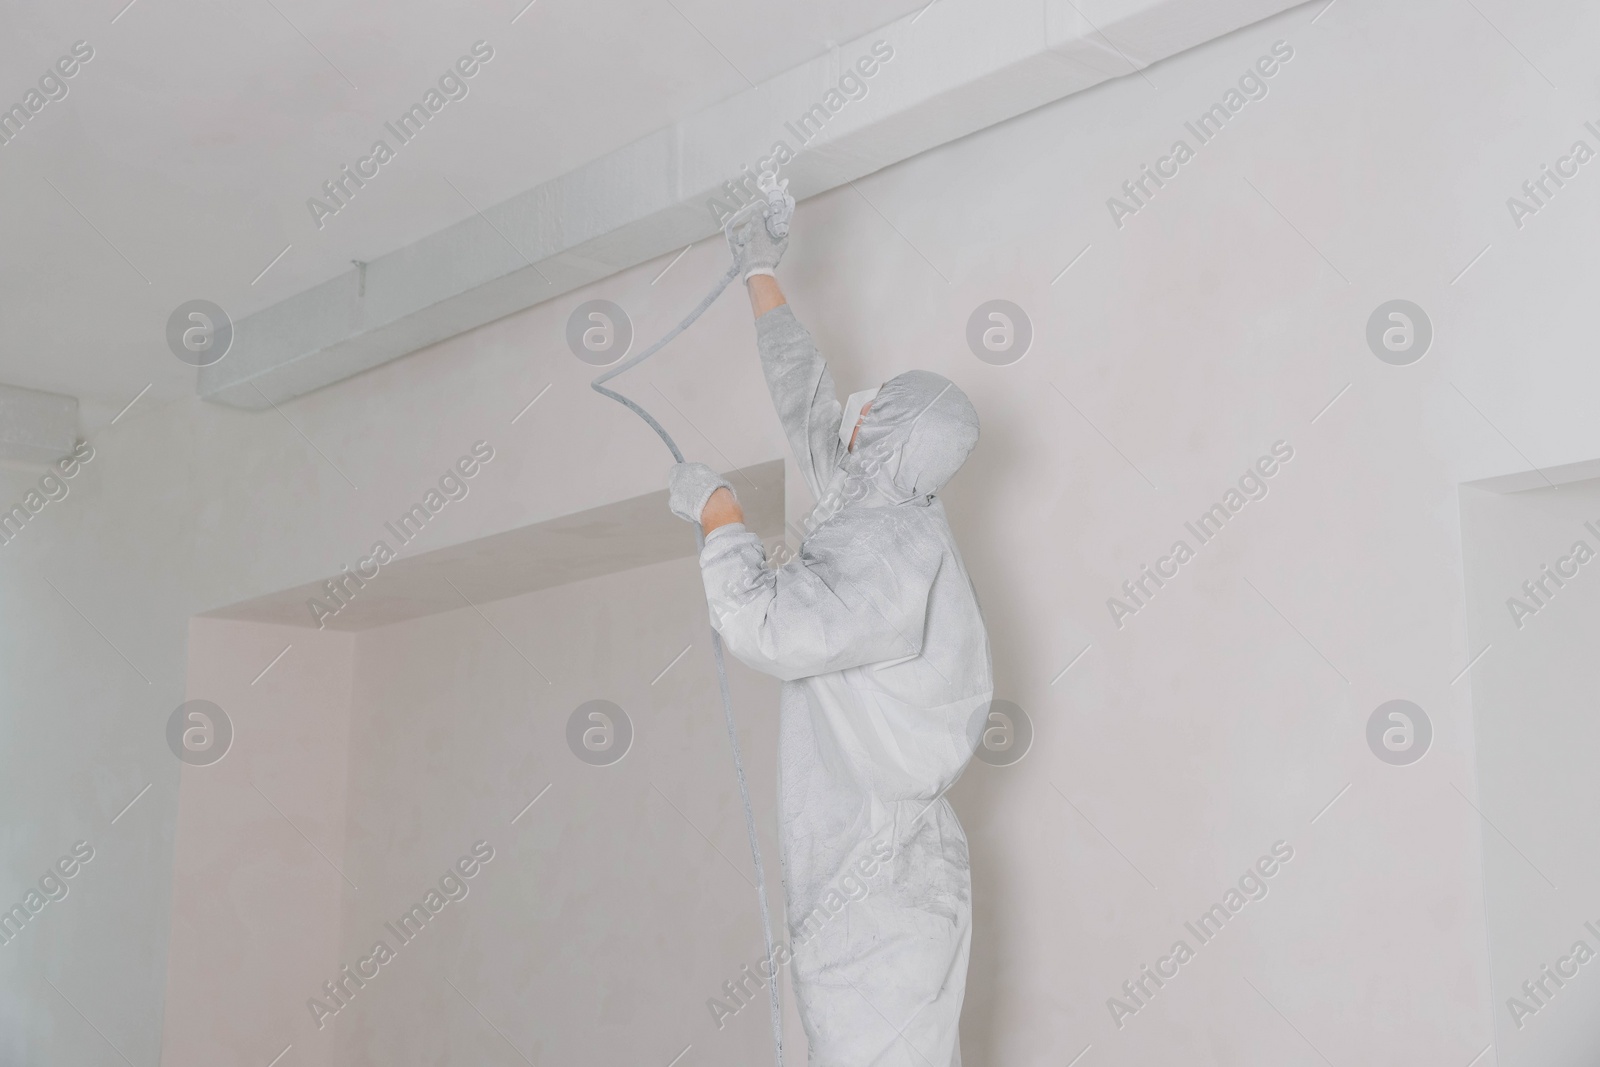 Photo of Decorator in protective overalls painting ceiling with spray gun indoors